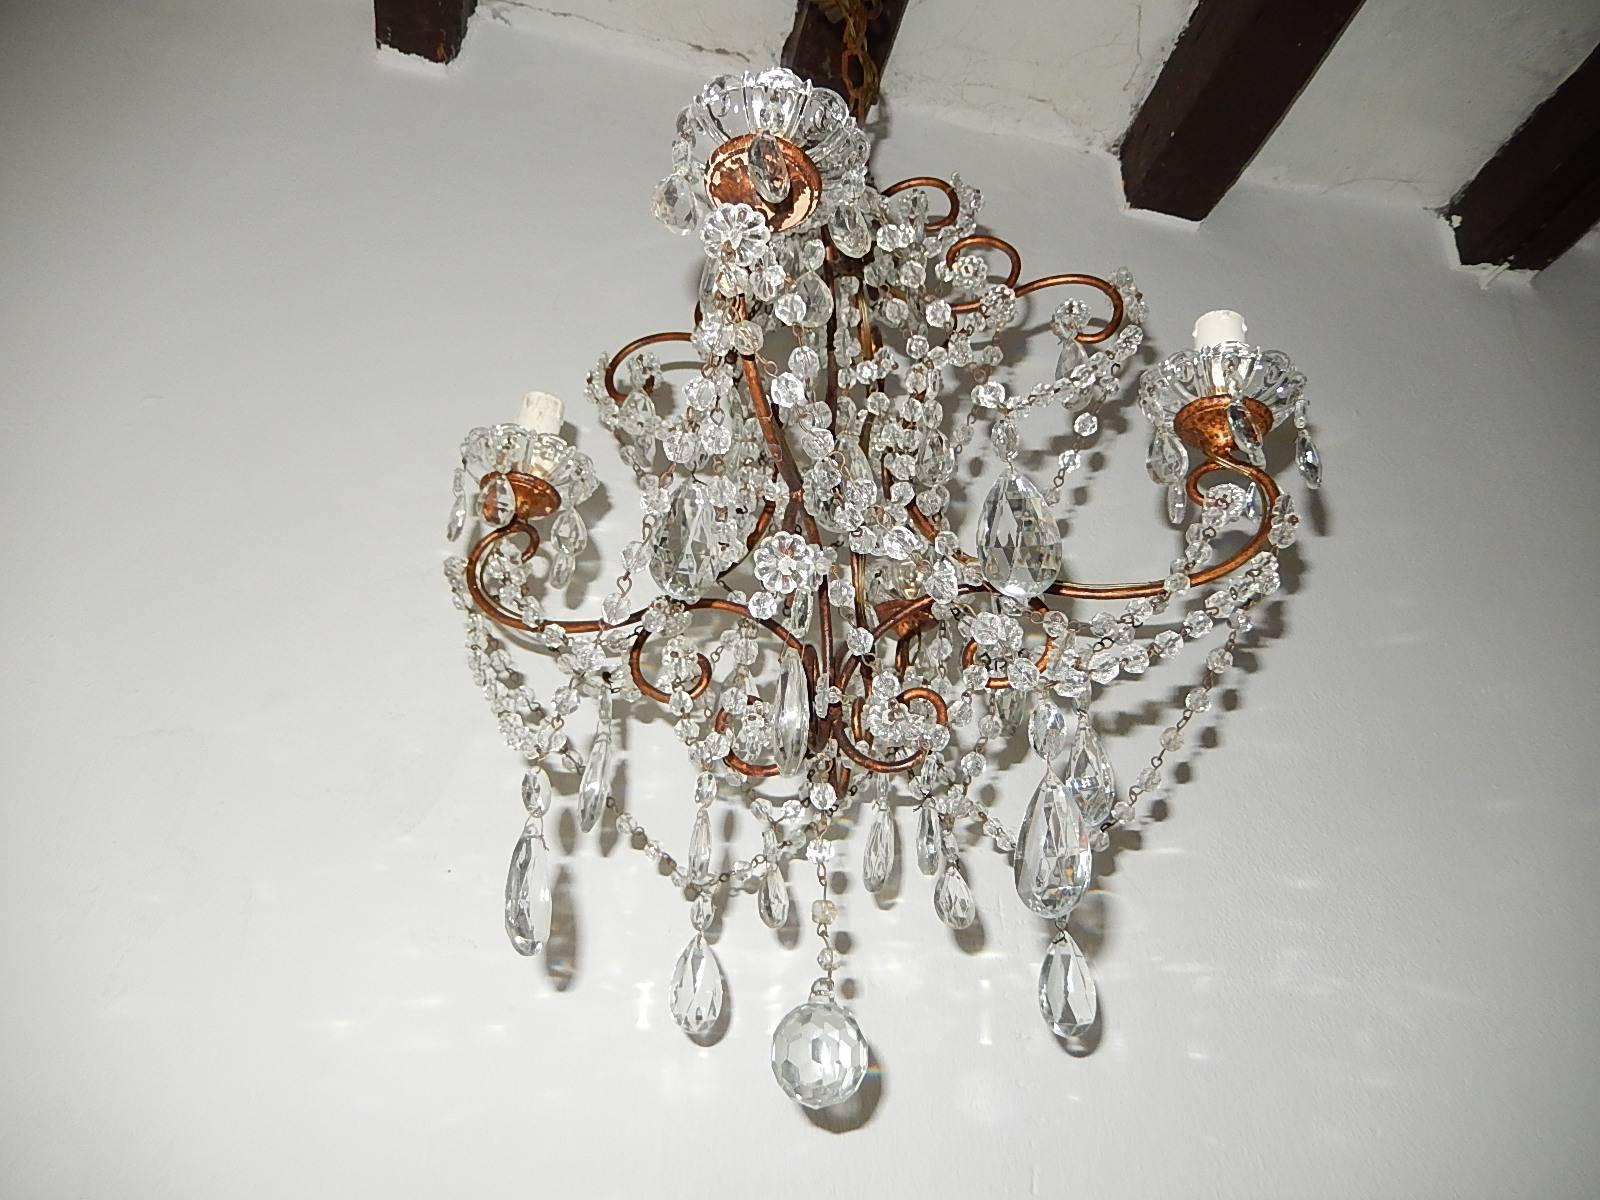 1920, French, Swags and Crystal Prisms Chandelier In Excellent Condition For Sale In Firenze, Toscana